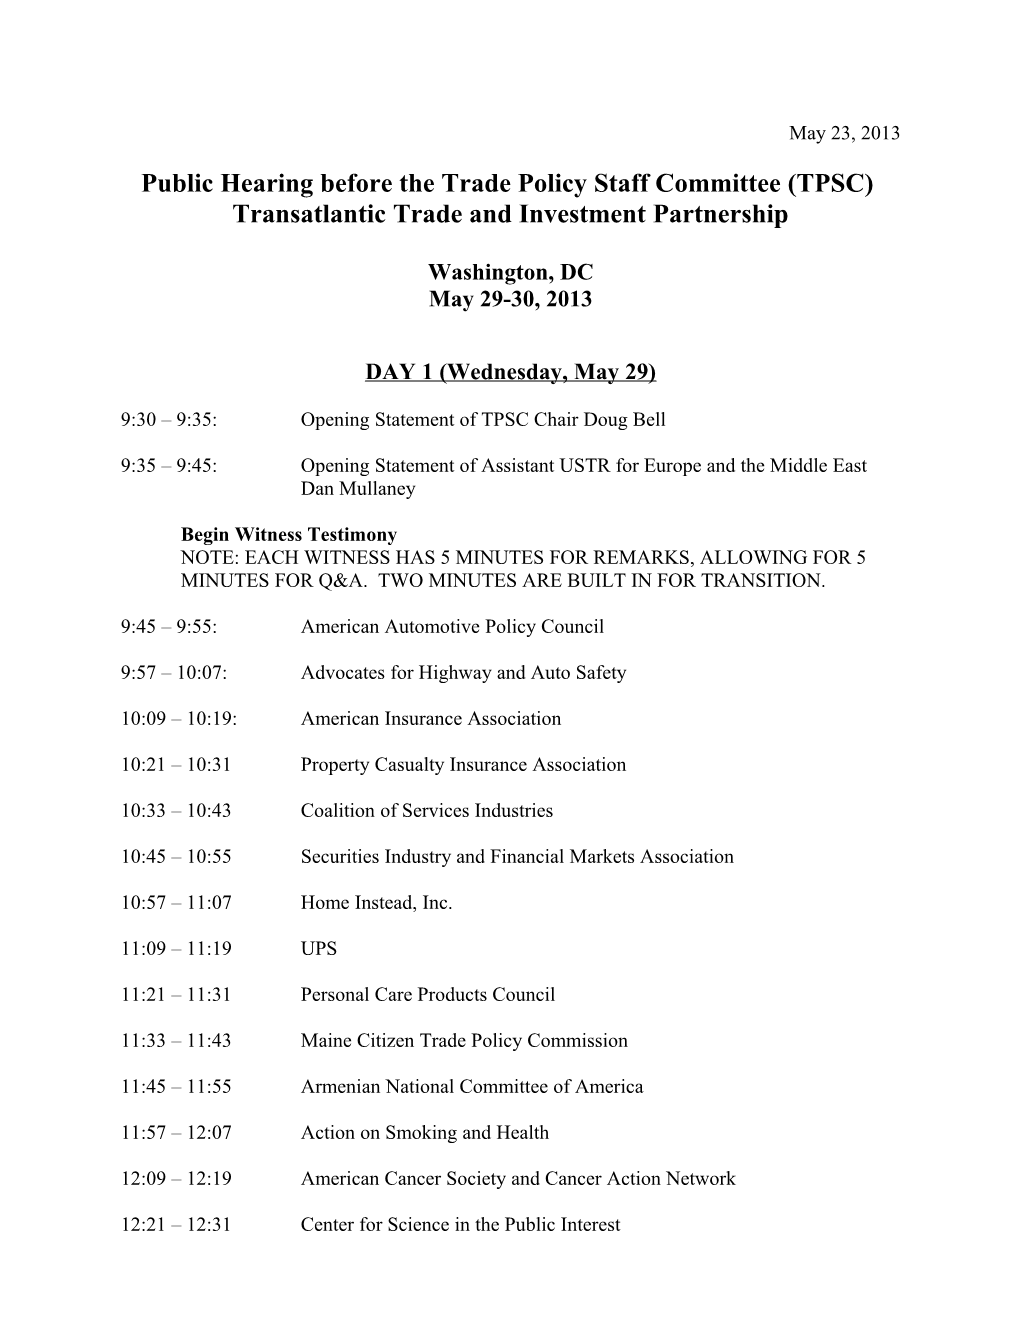 Public Hearing Before the Trade Policy Staff Committee (TPSC)